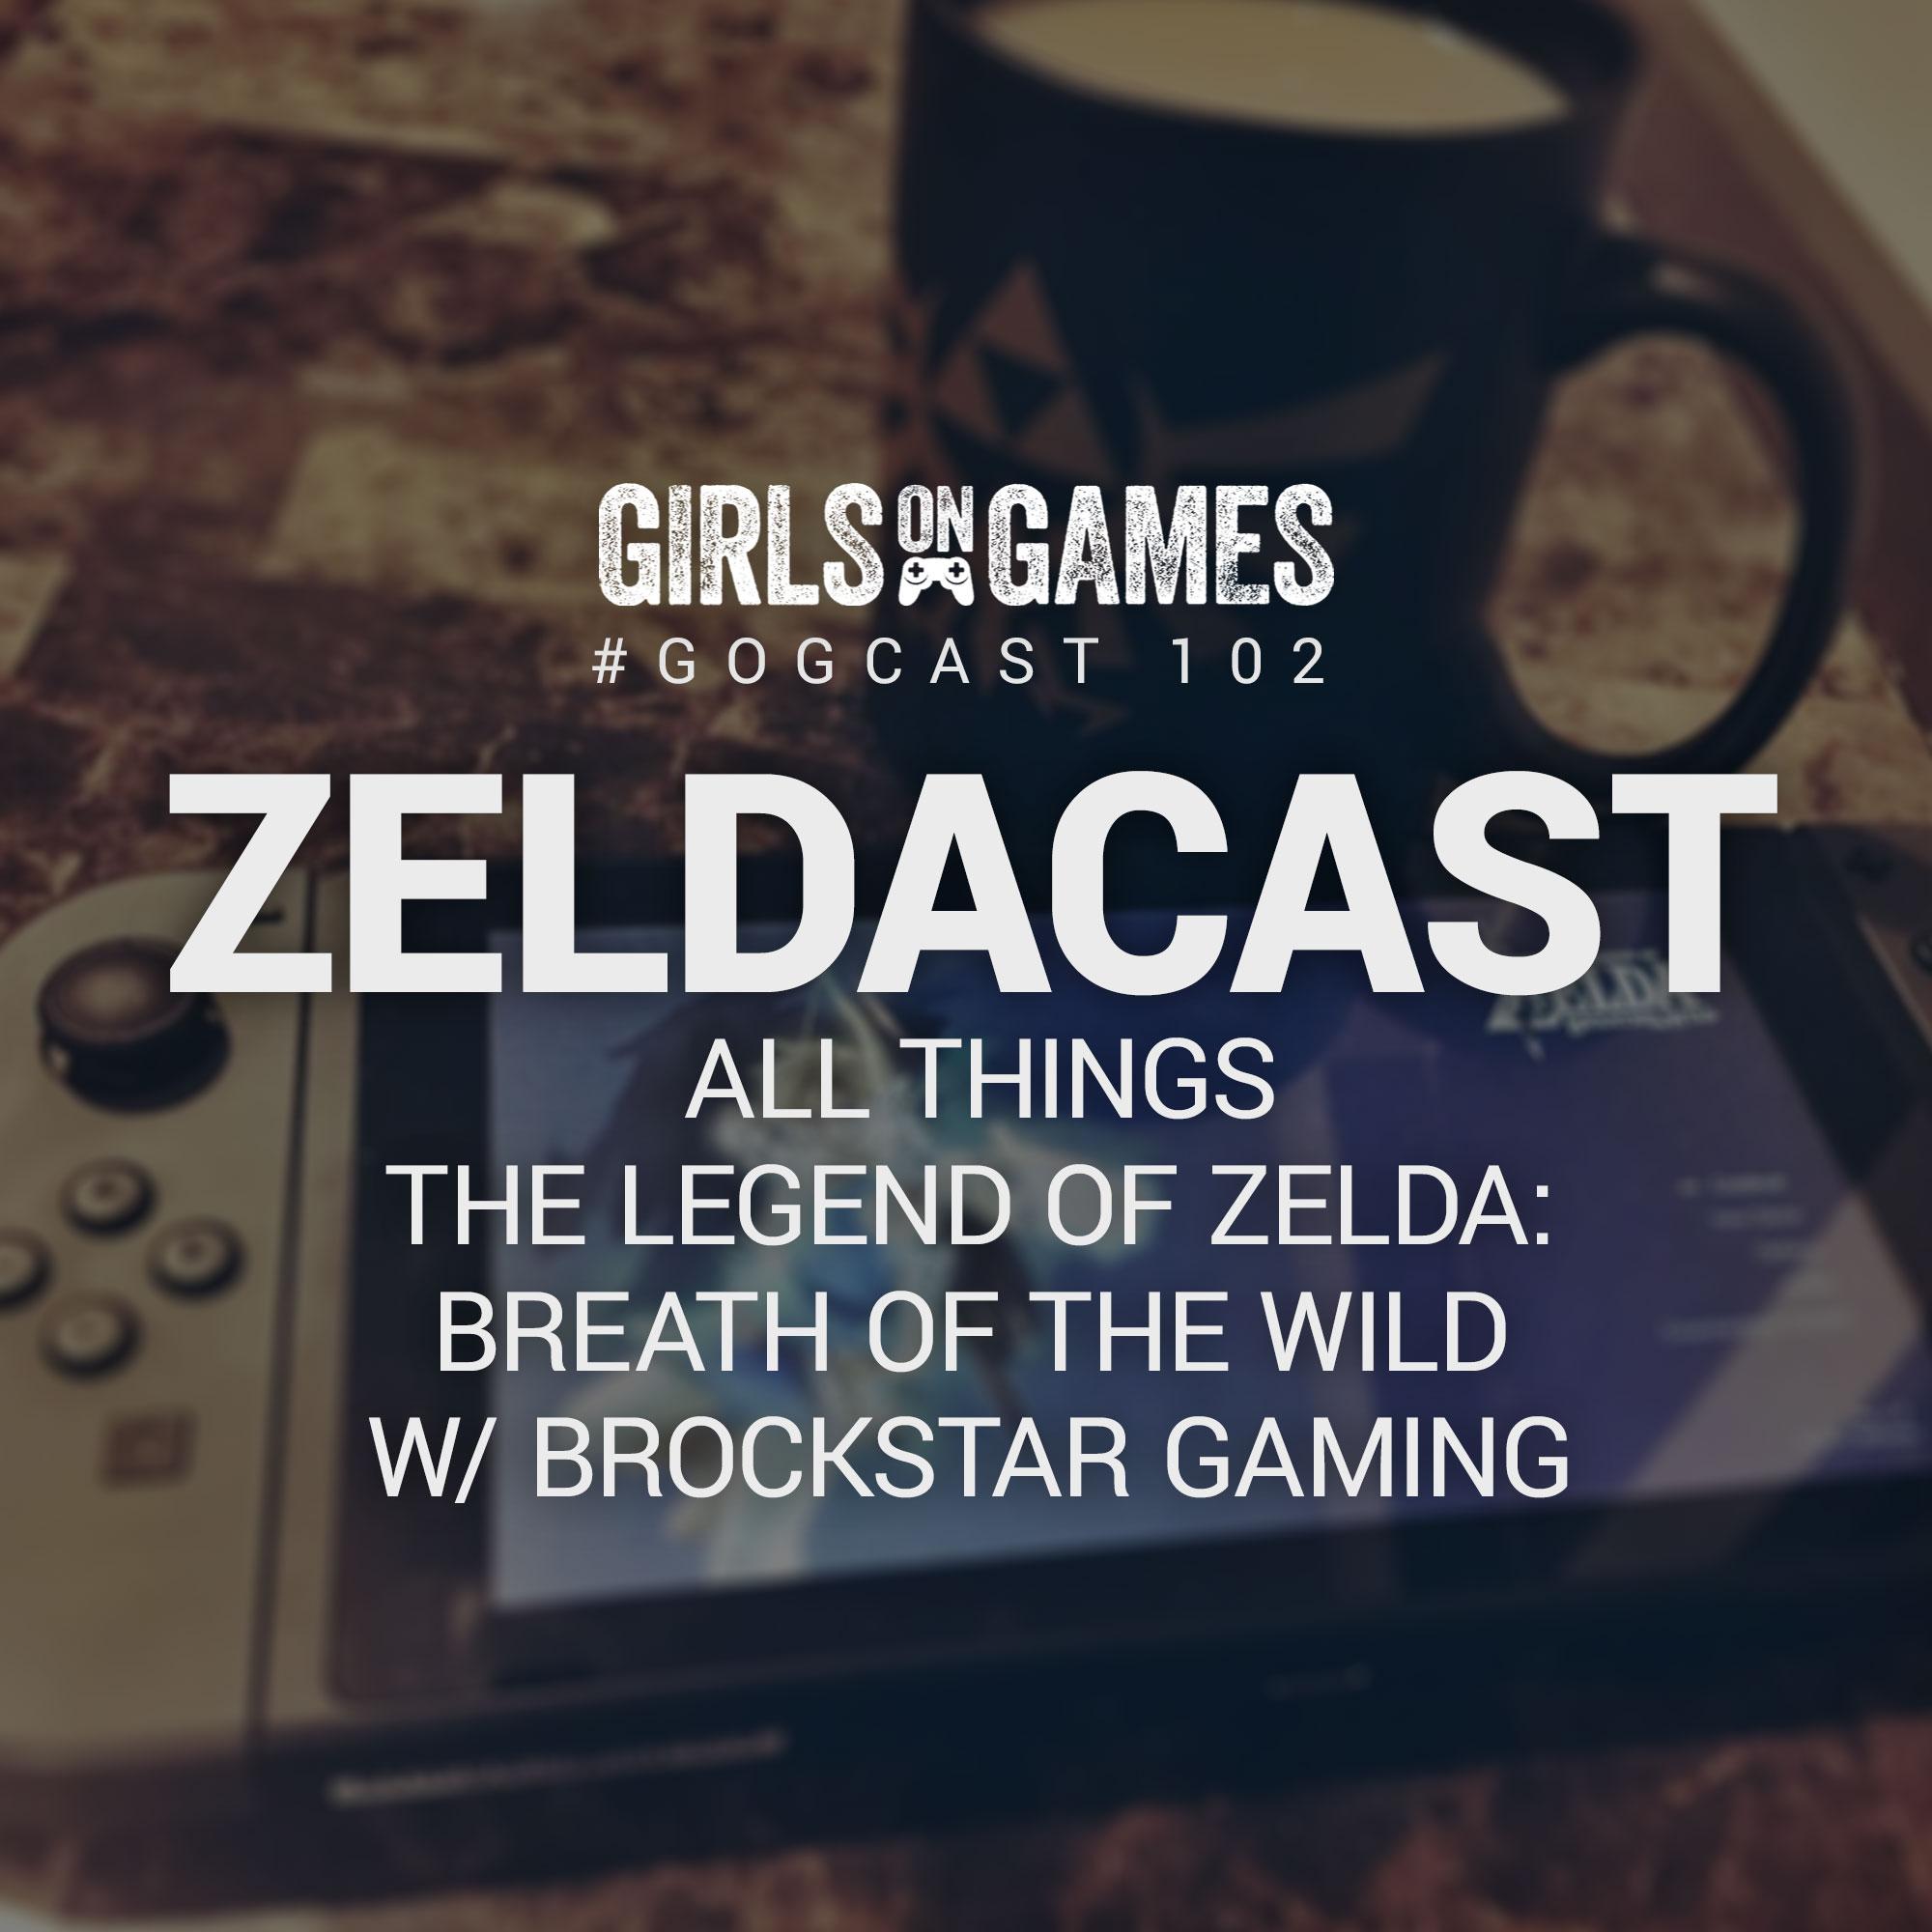 GoGCast 102: All Things The Legend of Zelda Breath of the Wild